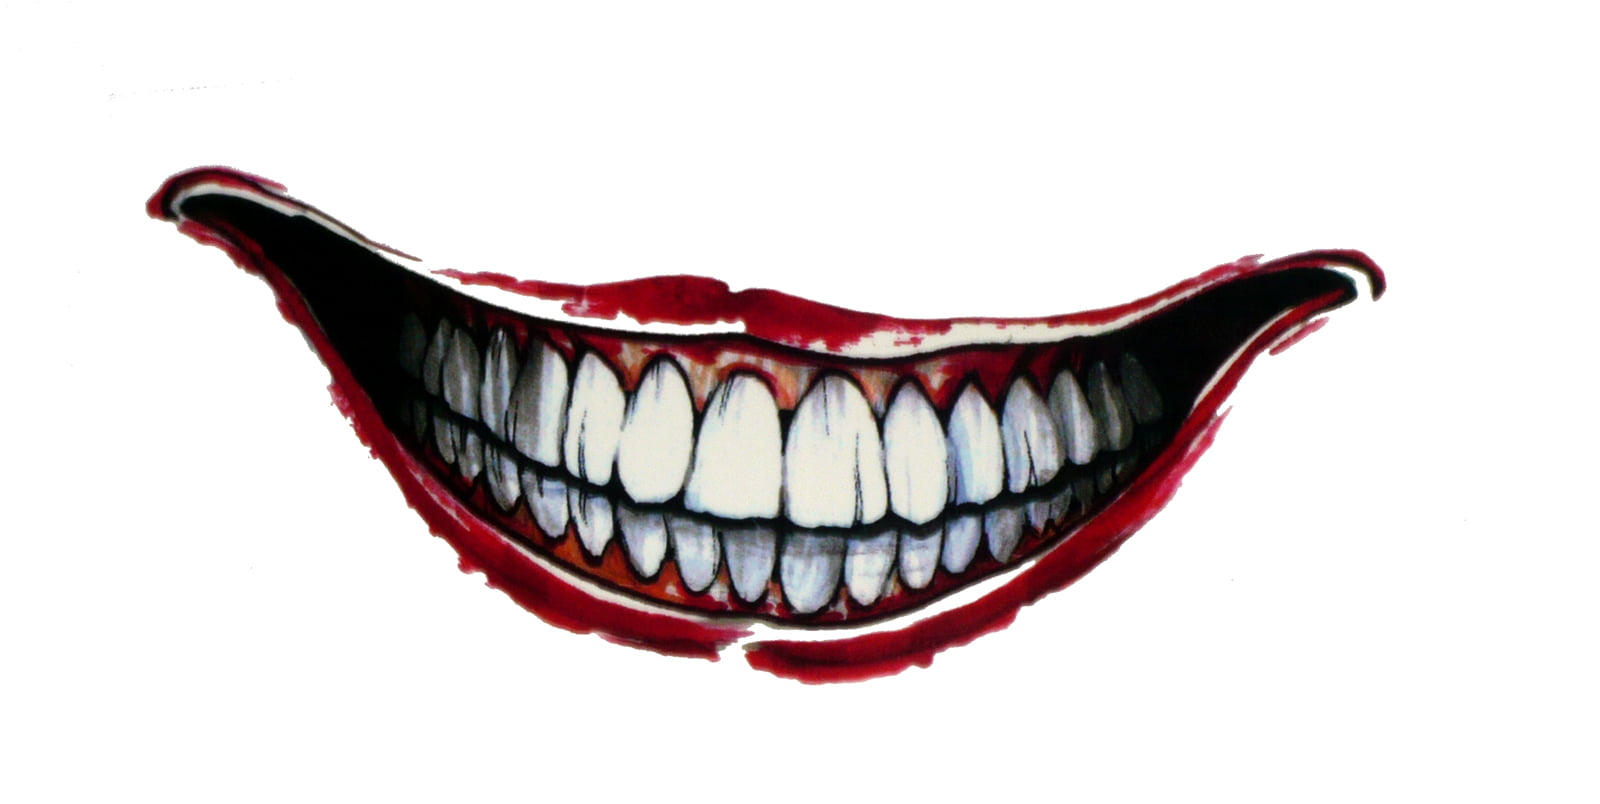 Download Hd Joker Sticker Jokers Smile Tattoo On Hand Clipart And Use The Free Clipart For Your Creative Project Smile Tattoo Joker Smile Tattoo Joker Smile